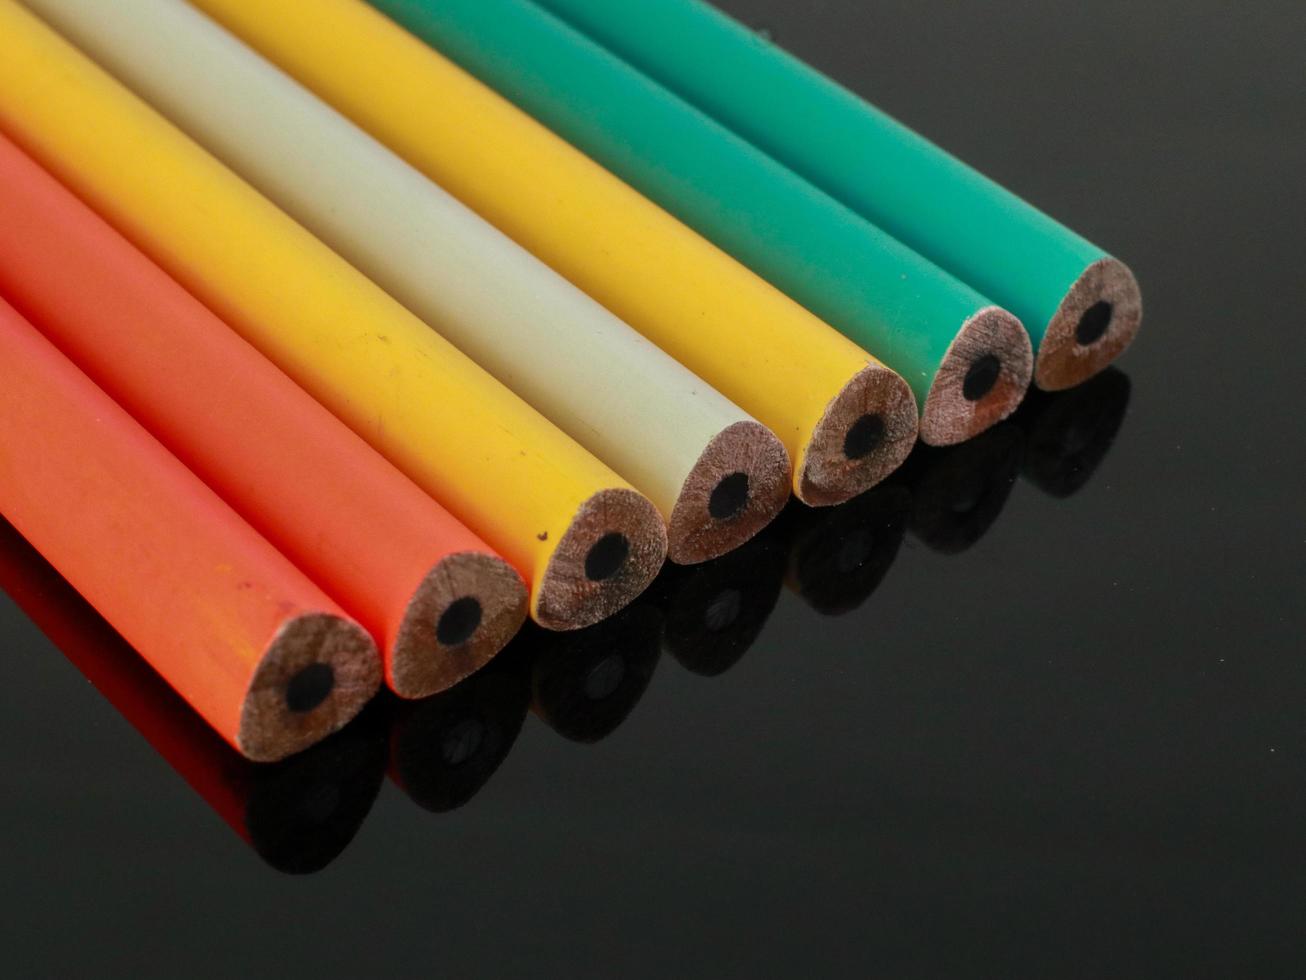 Close-up view of colorful new carbon pencils isolated photo